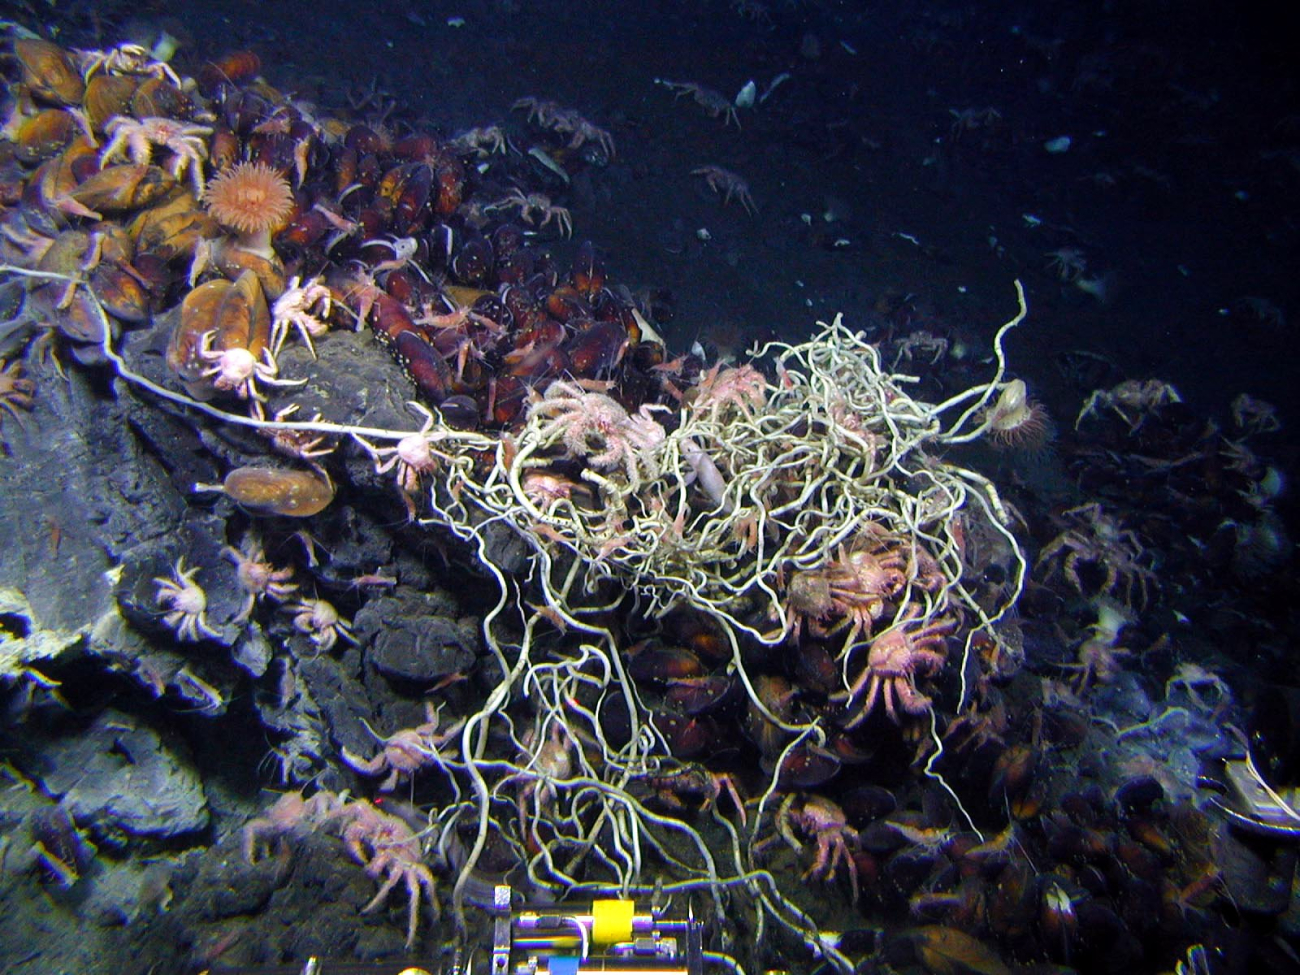 Spaghetti-like tubeworms living happily amongst mussels, anemones, a vent fish,and hungry crabs